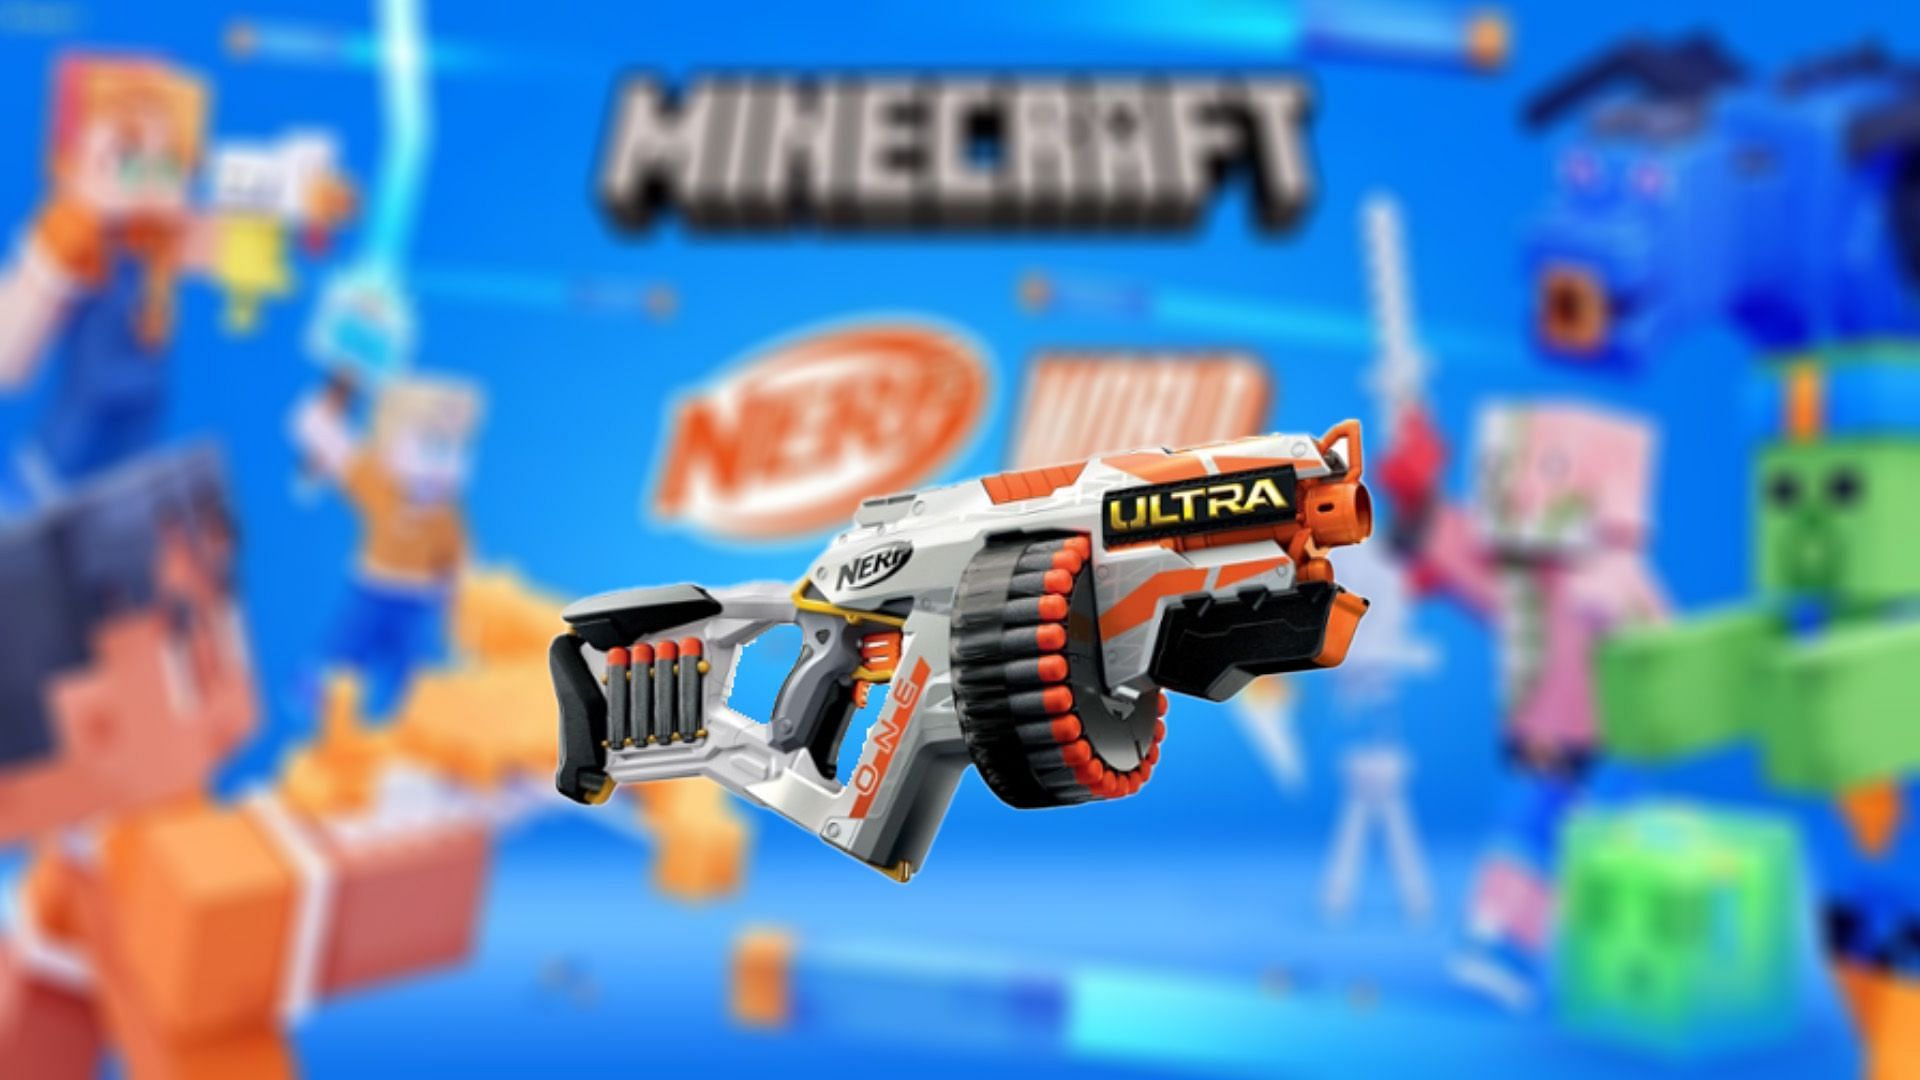 The real-life Minecraft Nerf weapons, but in Minecraft : r/Minecraft